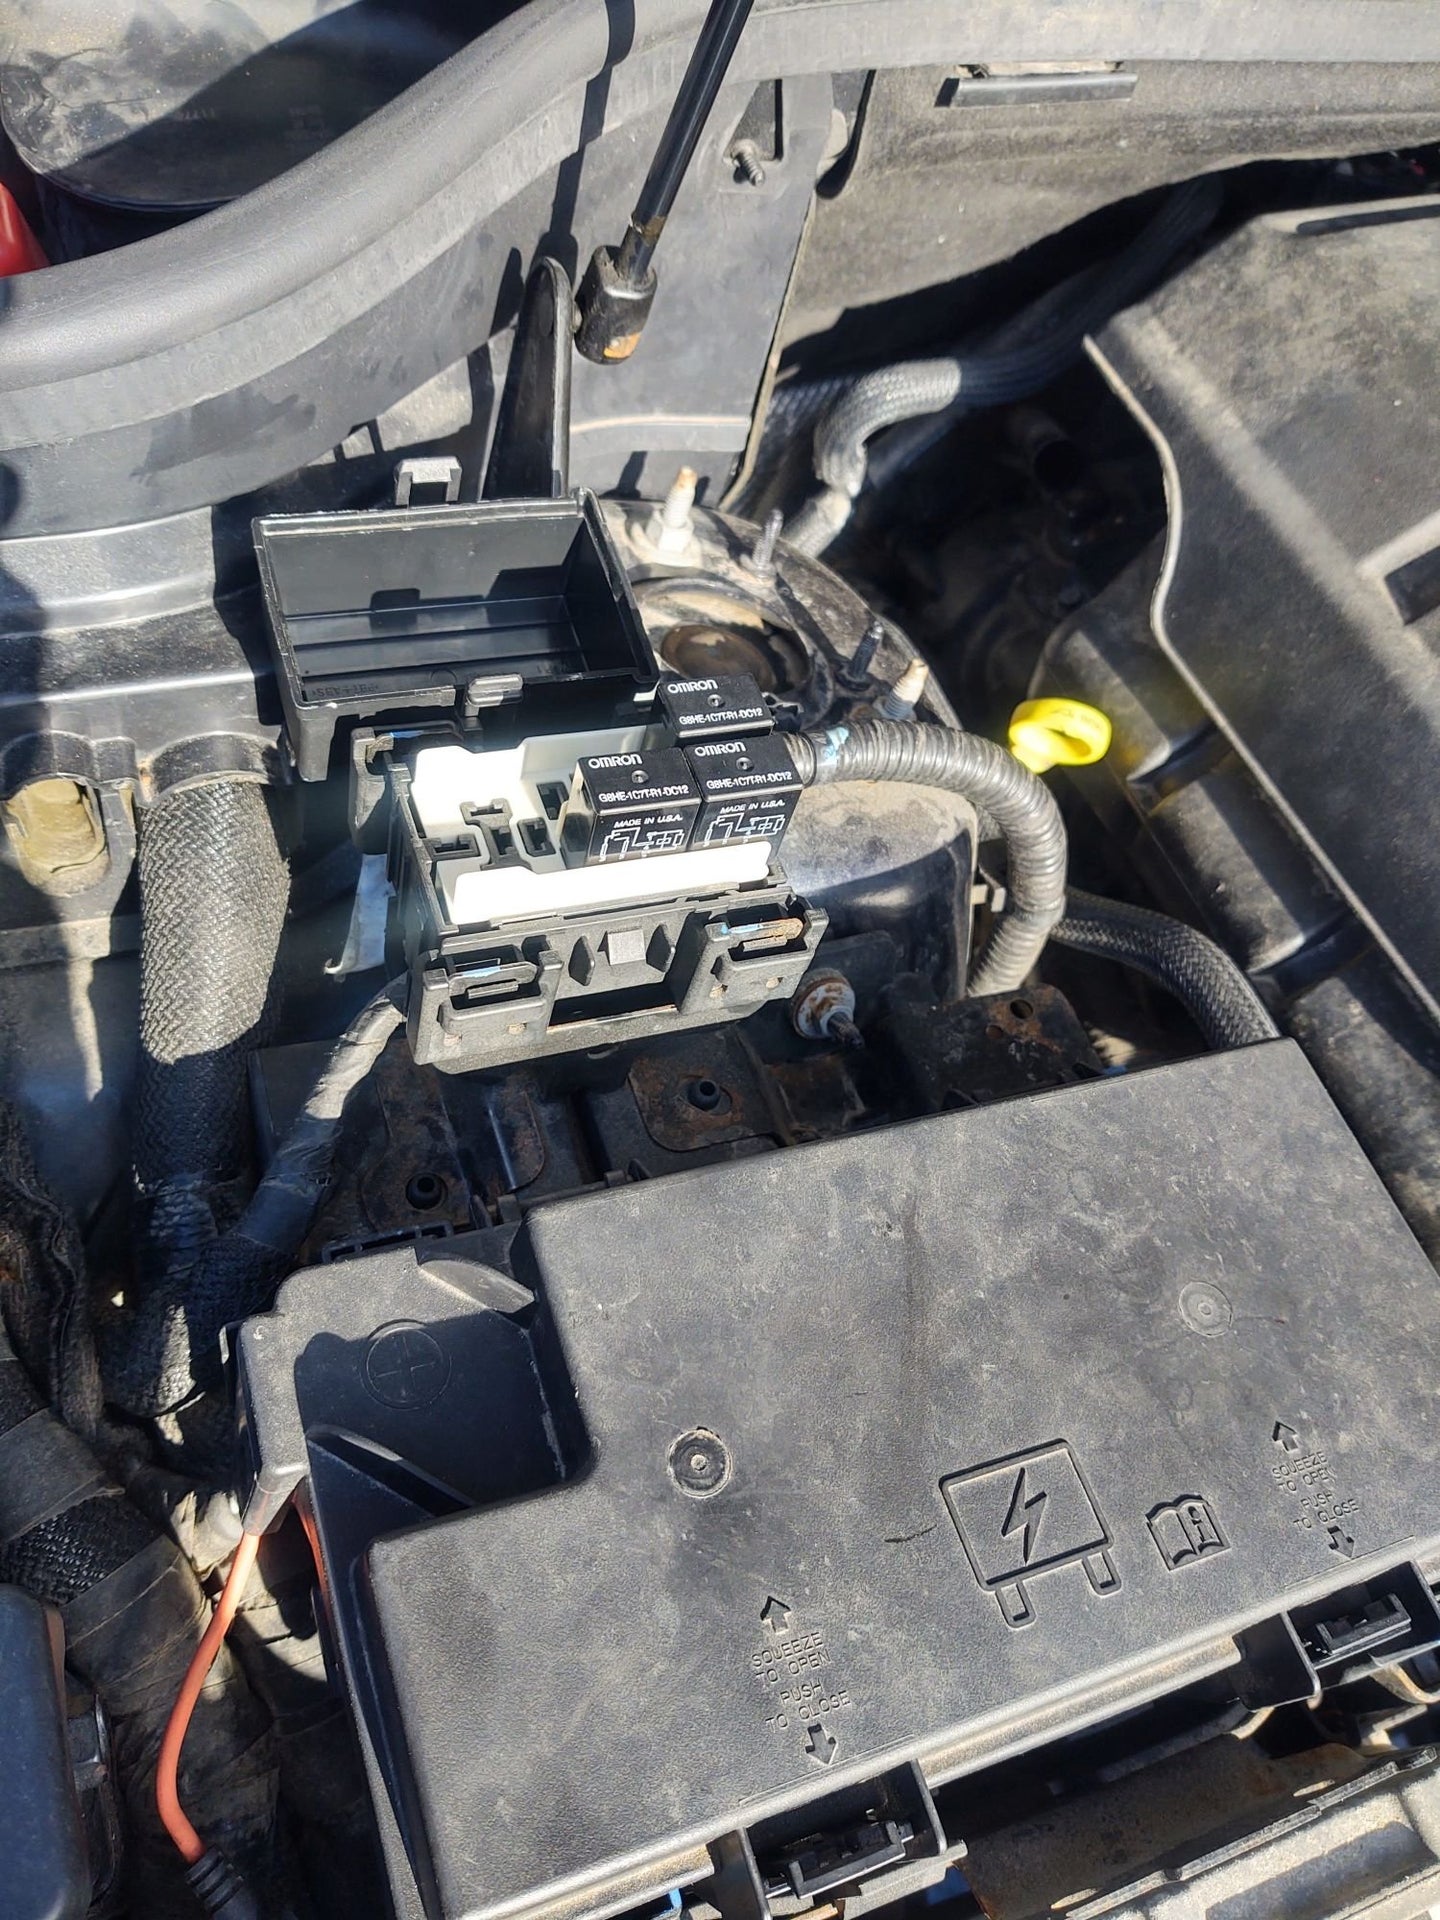 P0480 - cooling fan issues - troubleshooting help | Jeep Garage - Jeep Forum